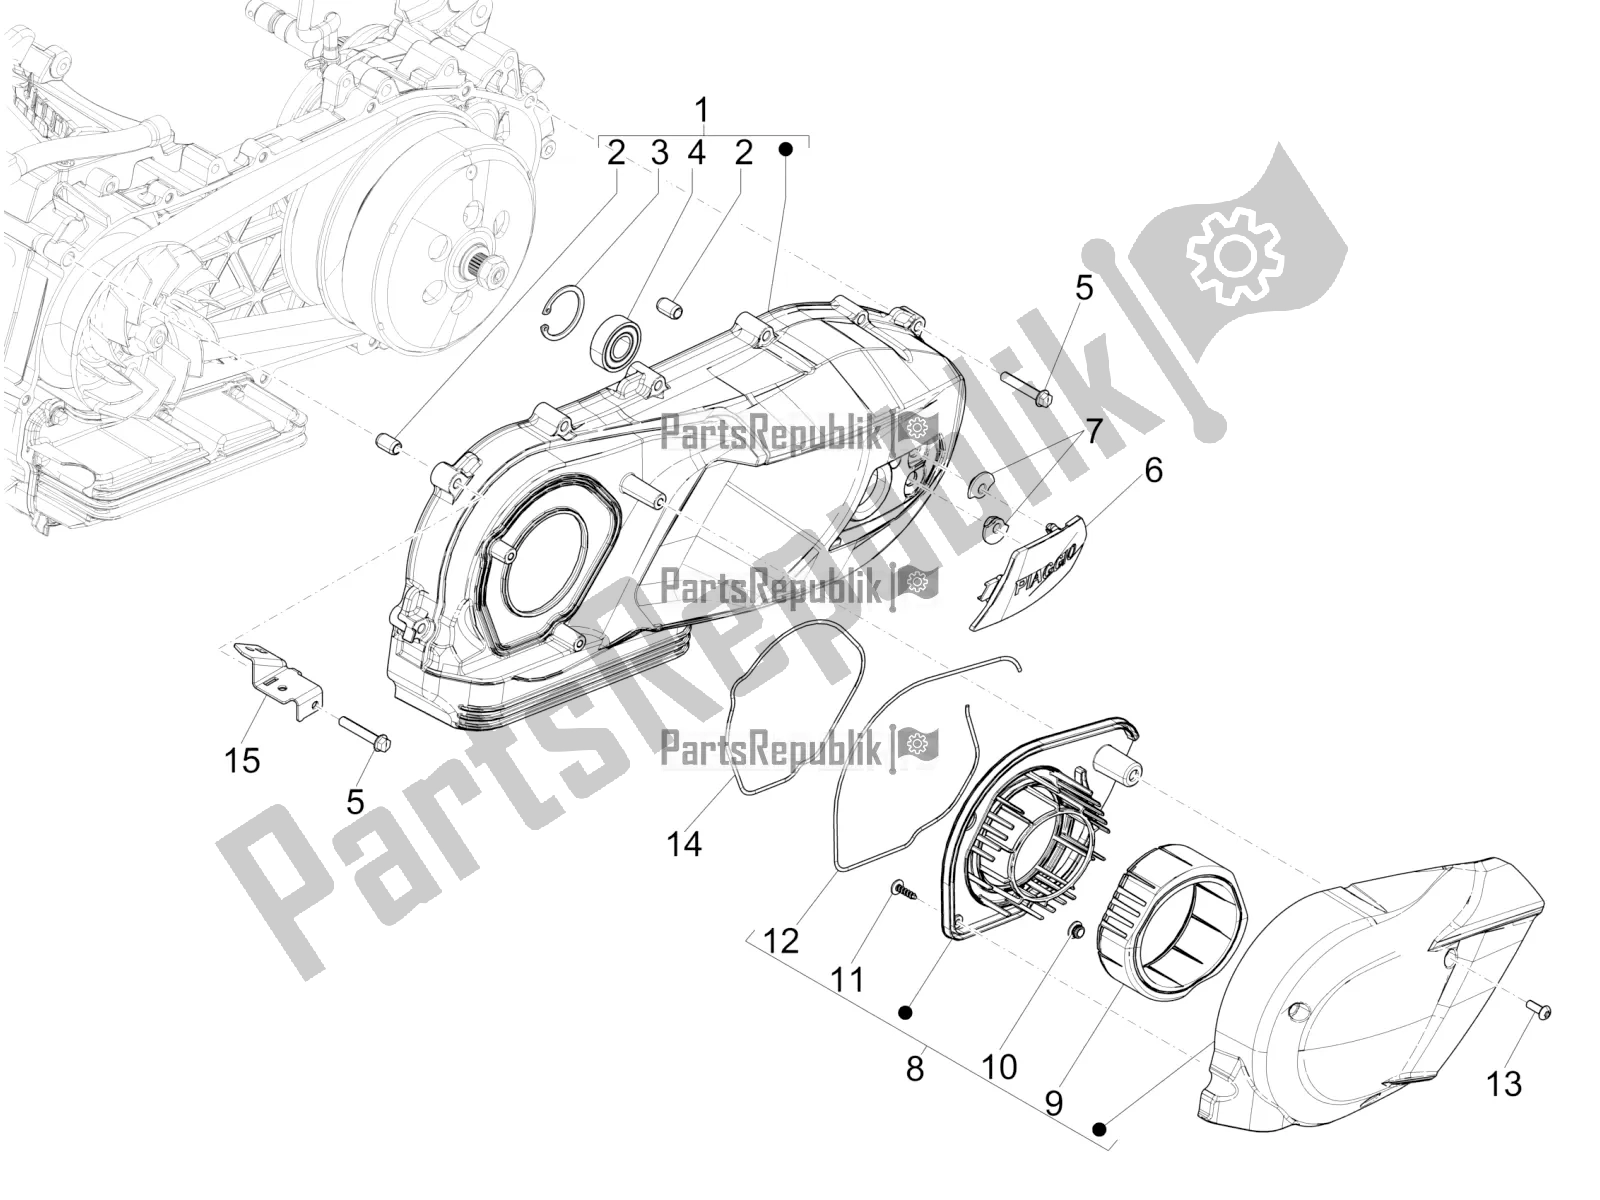 All parts for the Crankcase Cover - Crankcase Cooling of the Piaggio Medley 150 4T IE ABS 2017